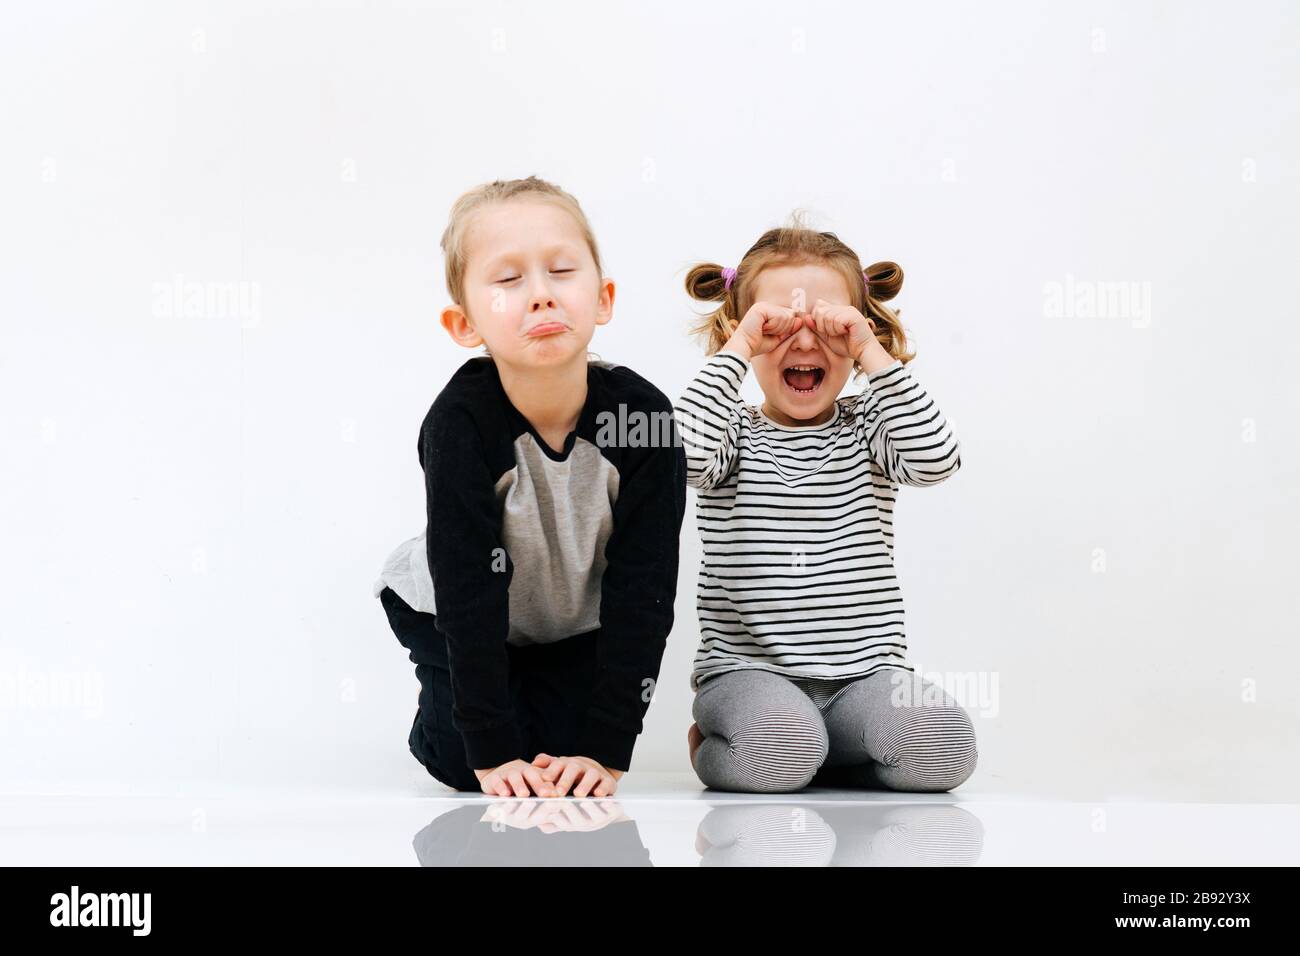 Sibling pretend, portray resentment and weeping through laughter Stock Photo